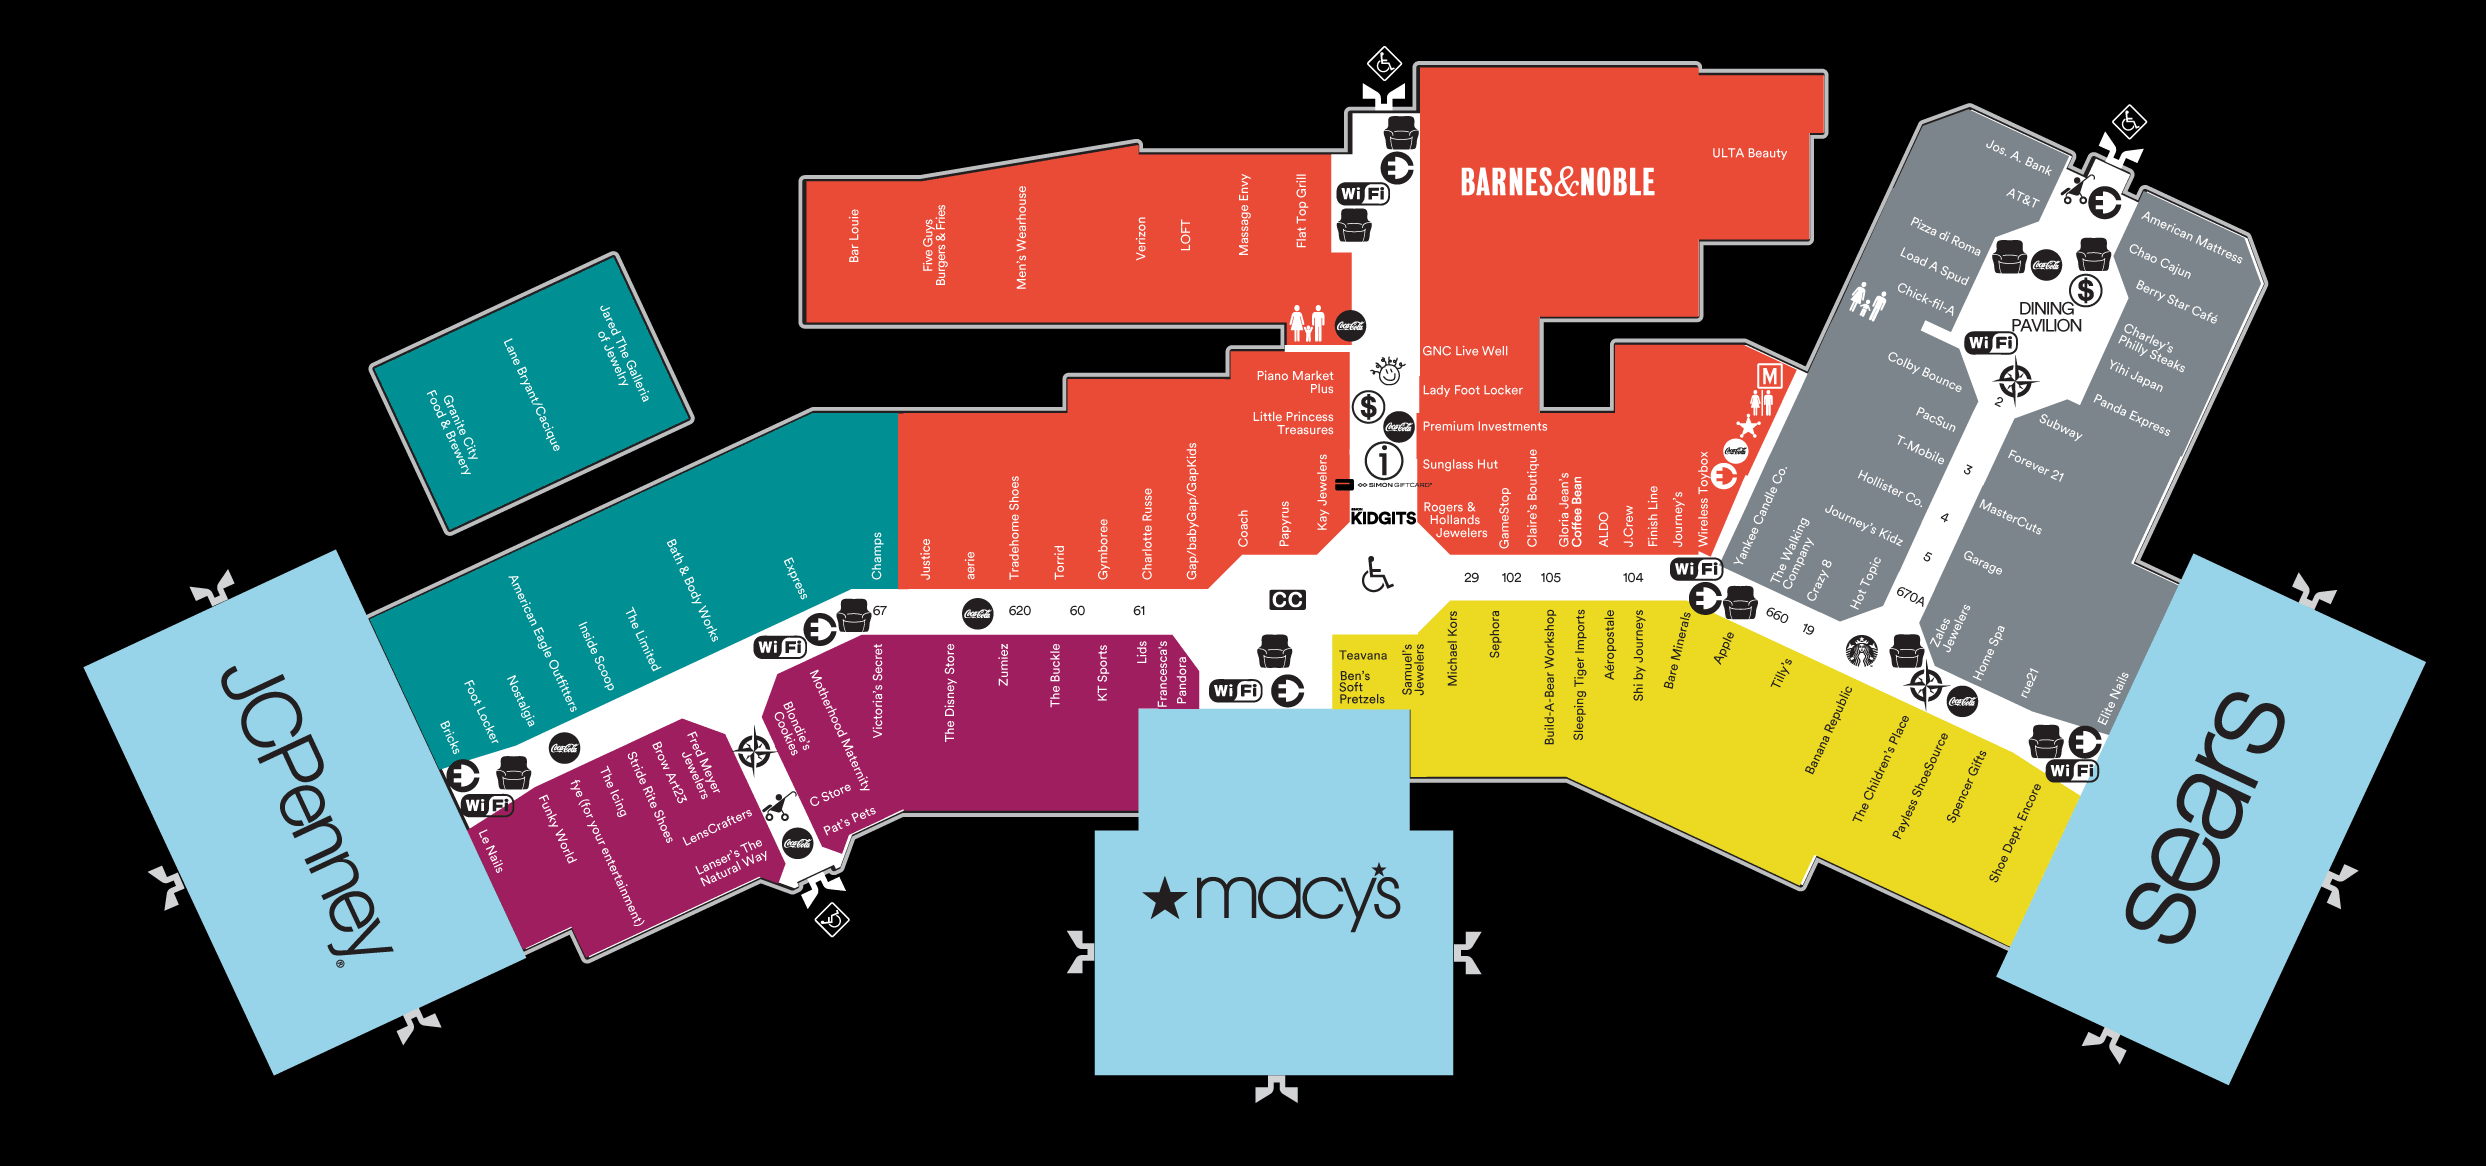 Store Directory For University Park Mall A Shopping Center In Mishawaka In A Simon Property